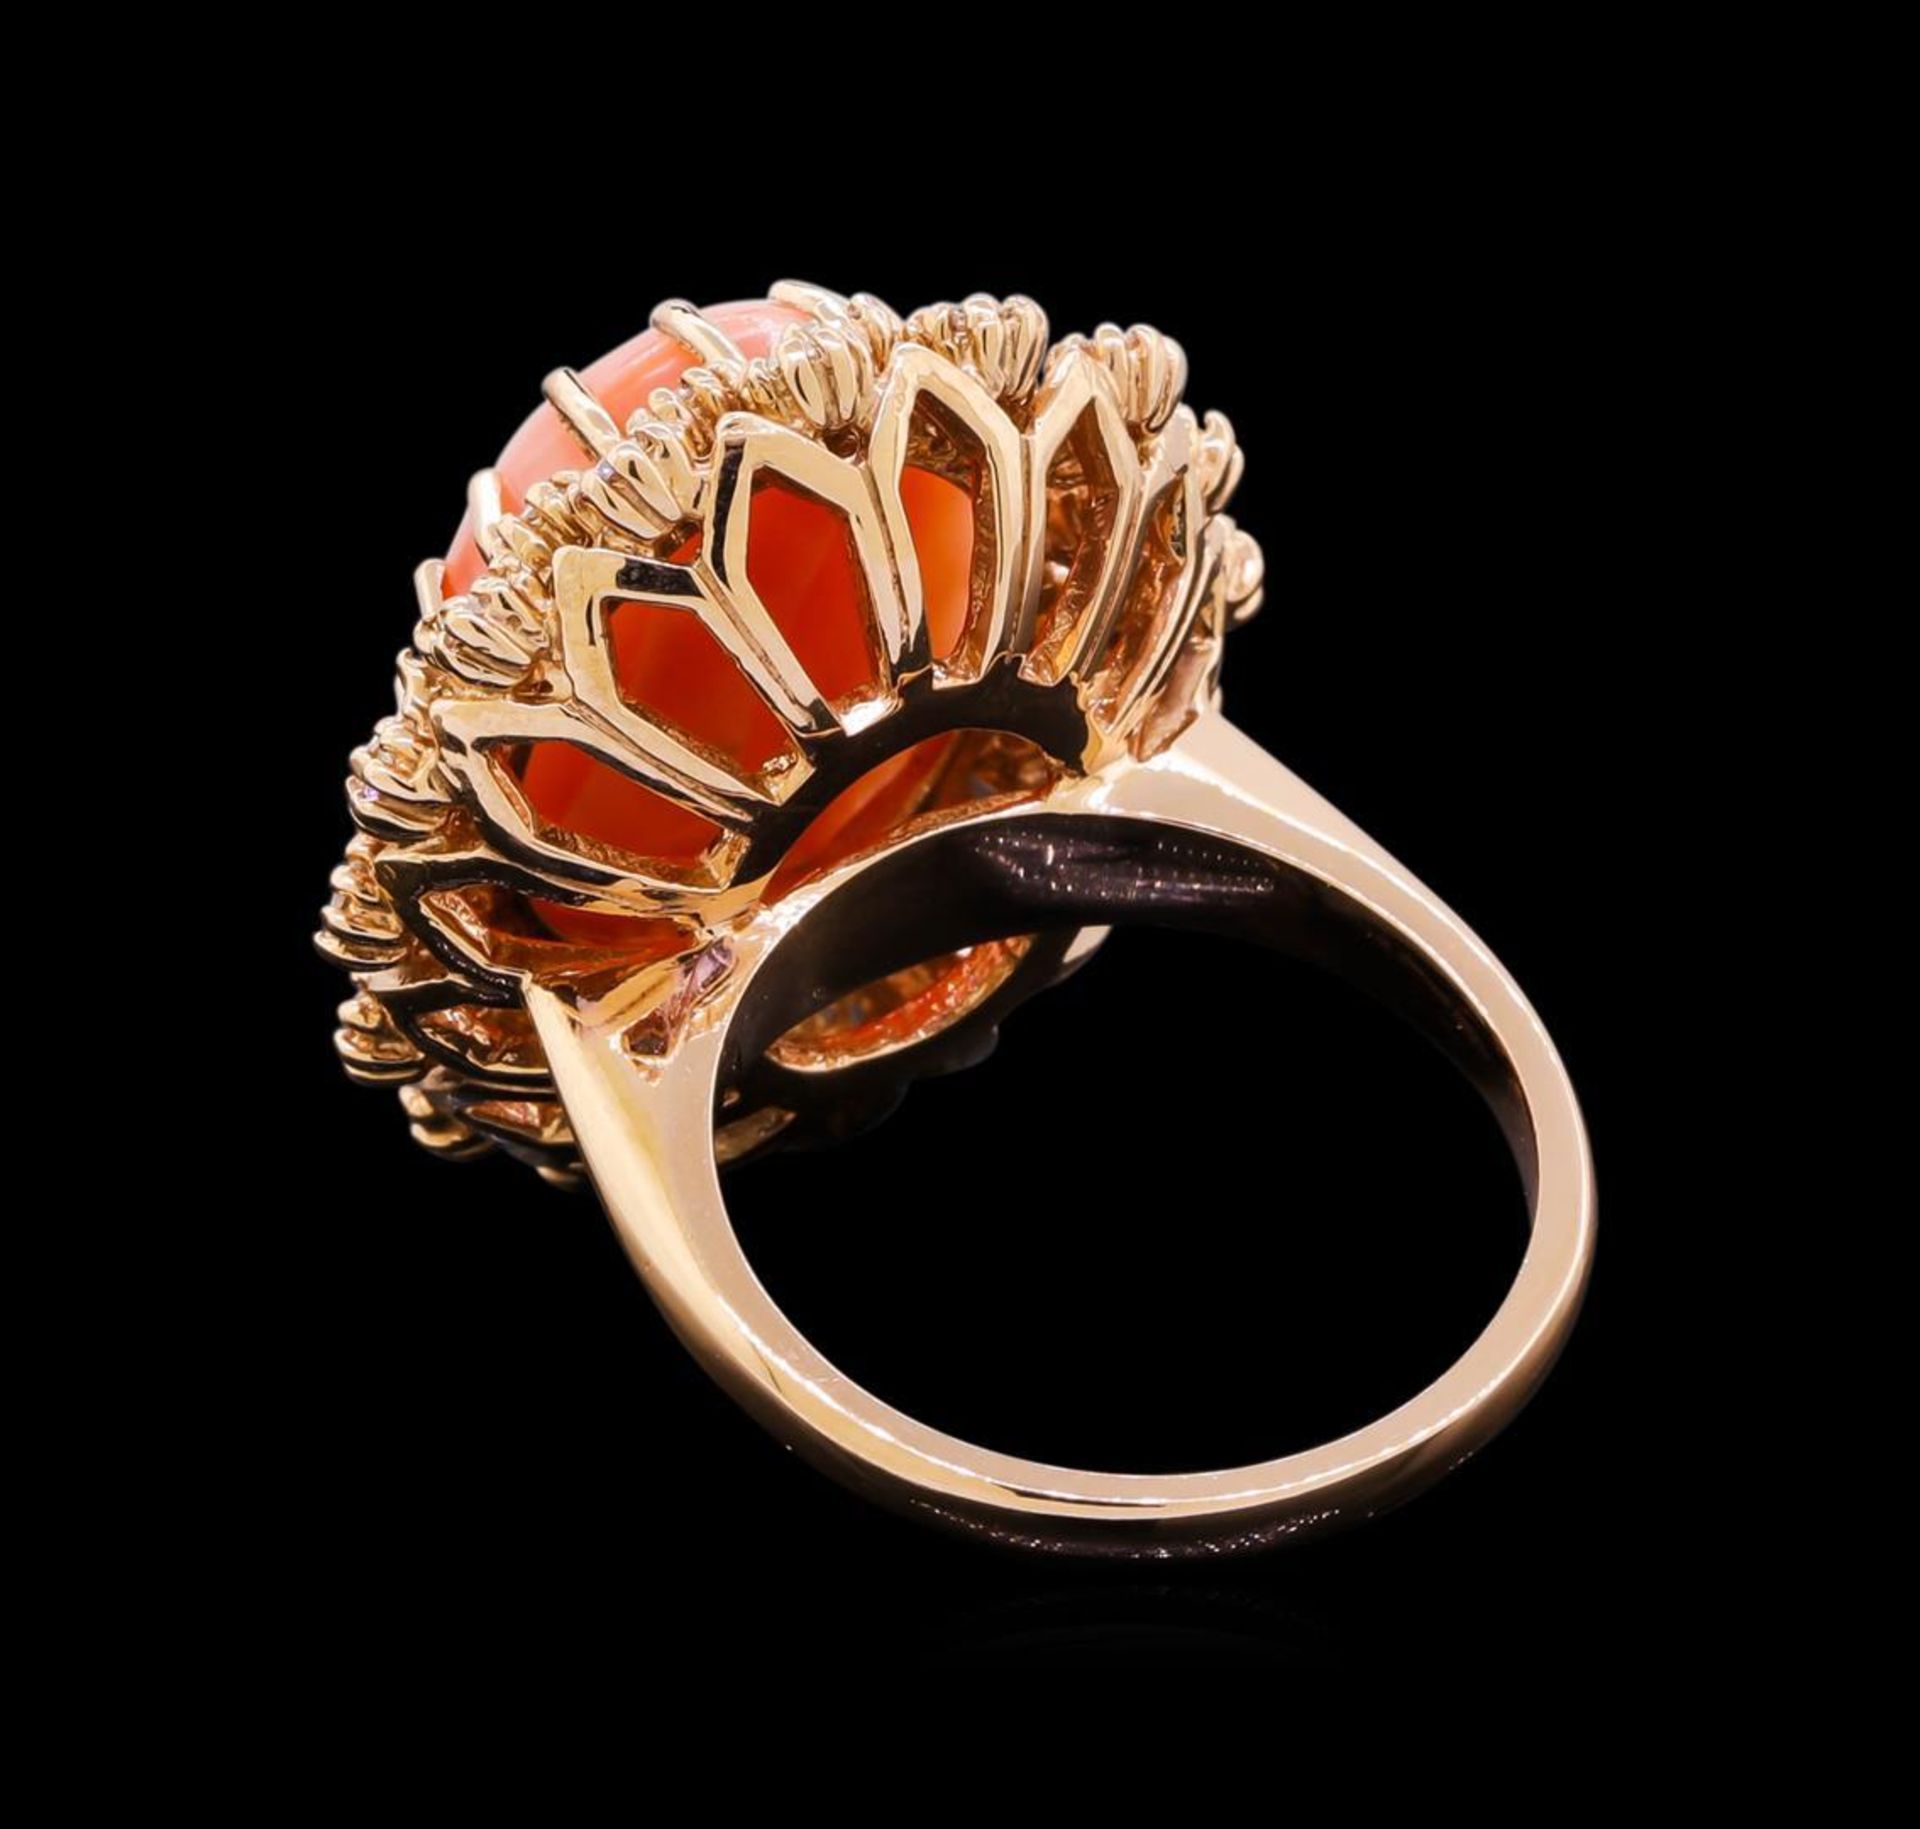 9.60 ctw Pink Coral and Diamond Ring - 14KT Rose Gold - Image 3 of 5